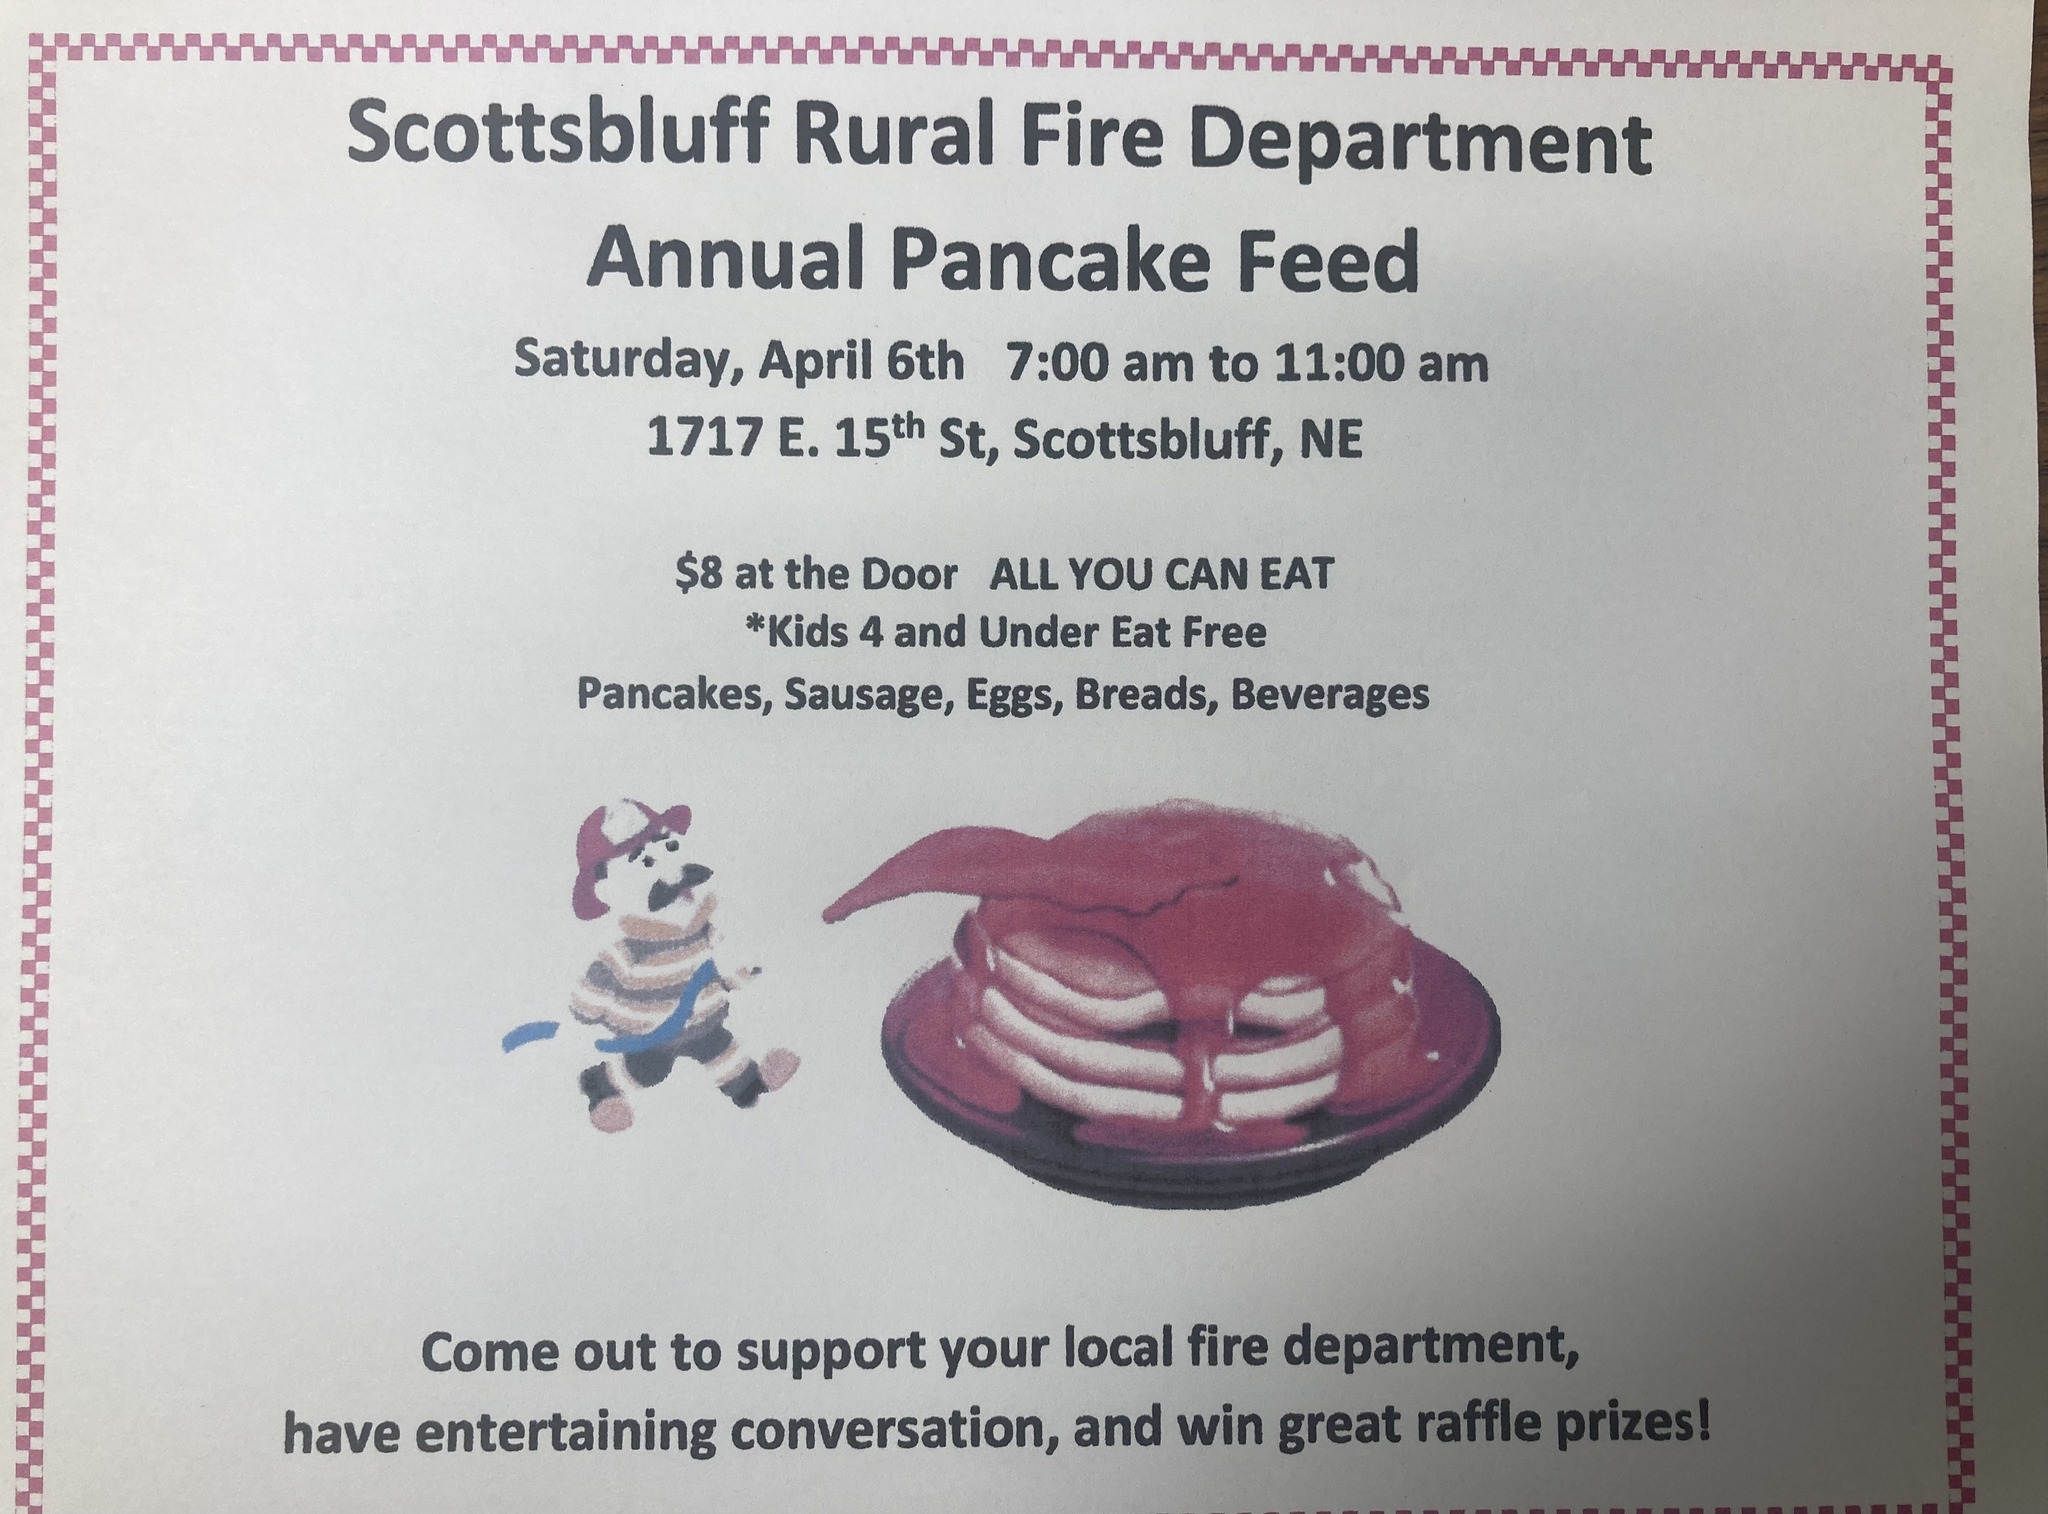 Event Promo Photo For Annual Pancake Feed